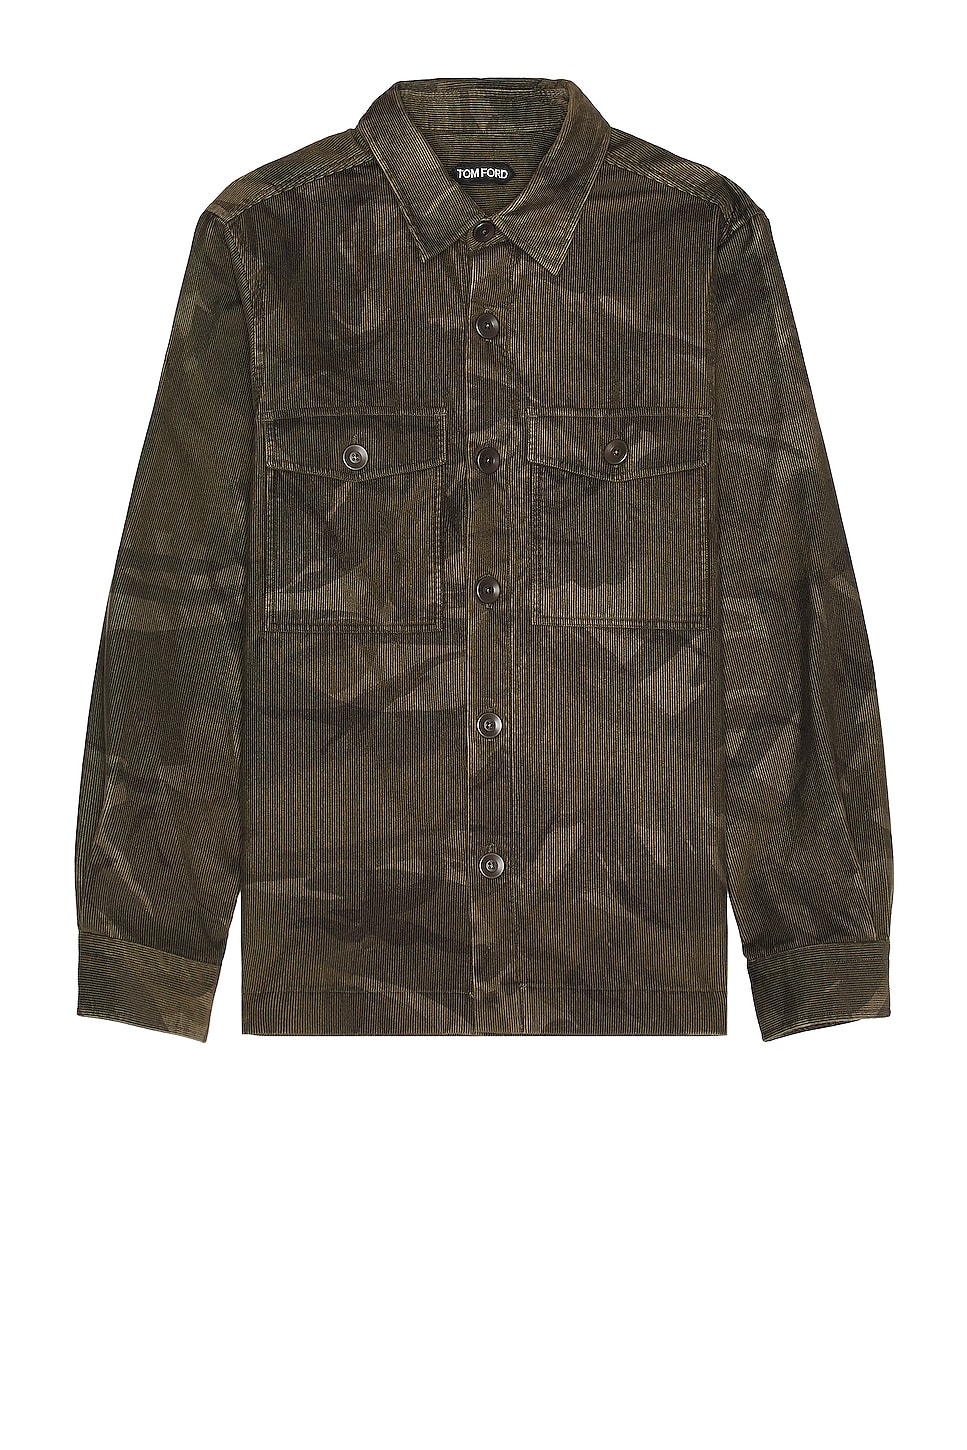 Image 1 of TOM FORD Camo Cord Over Shirt in Combo Camo